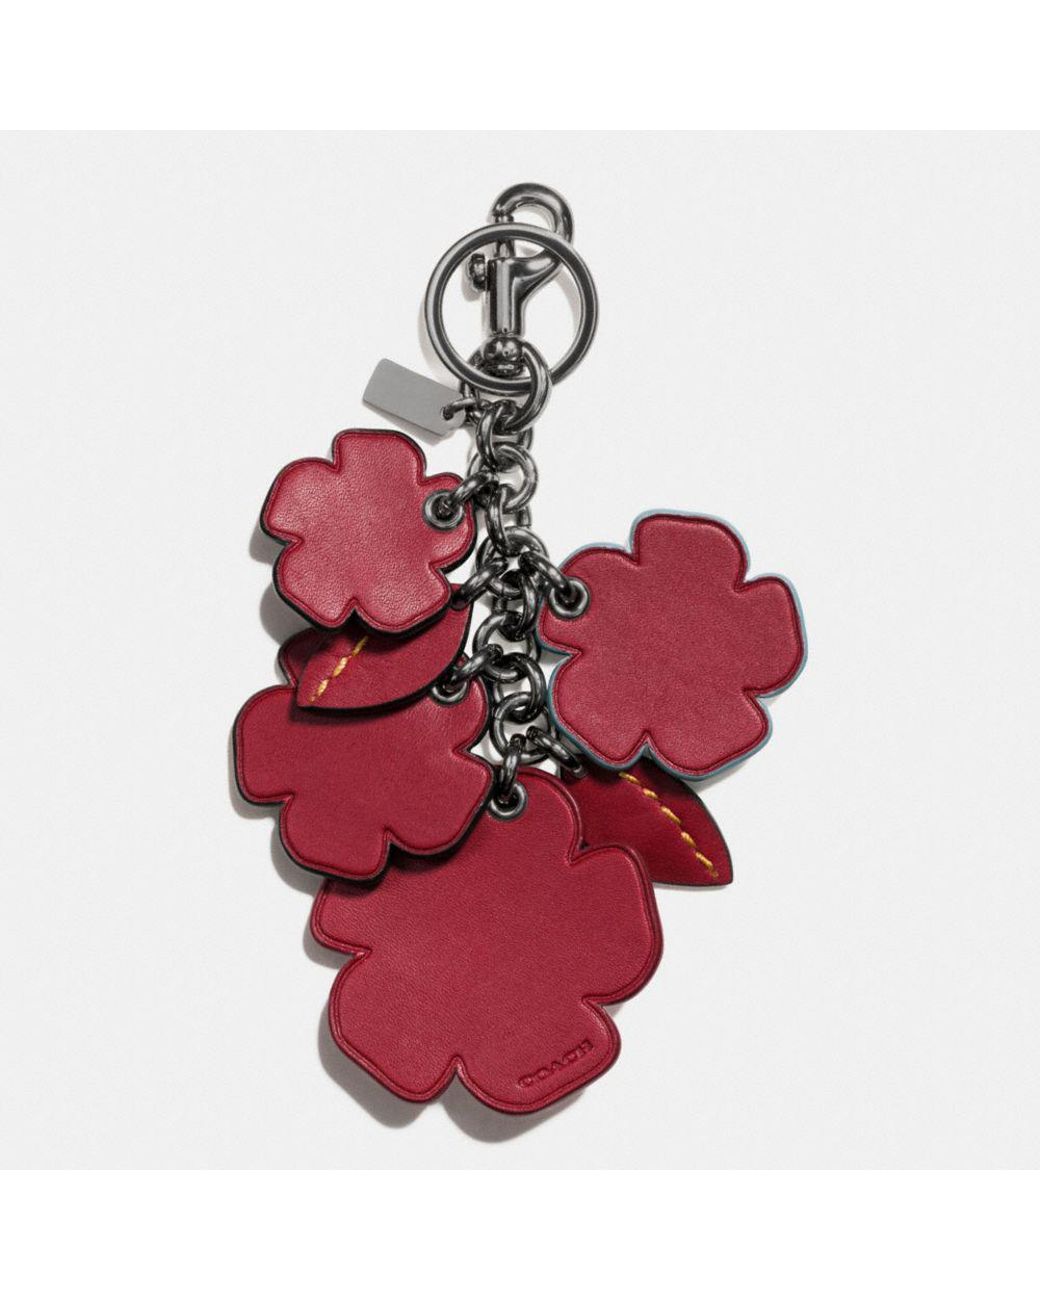 COACH Boxed Willow Floral Bag Charm - Macy's